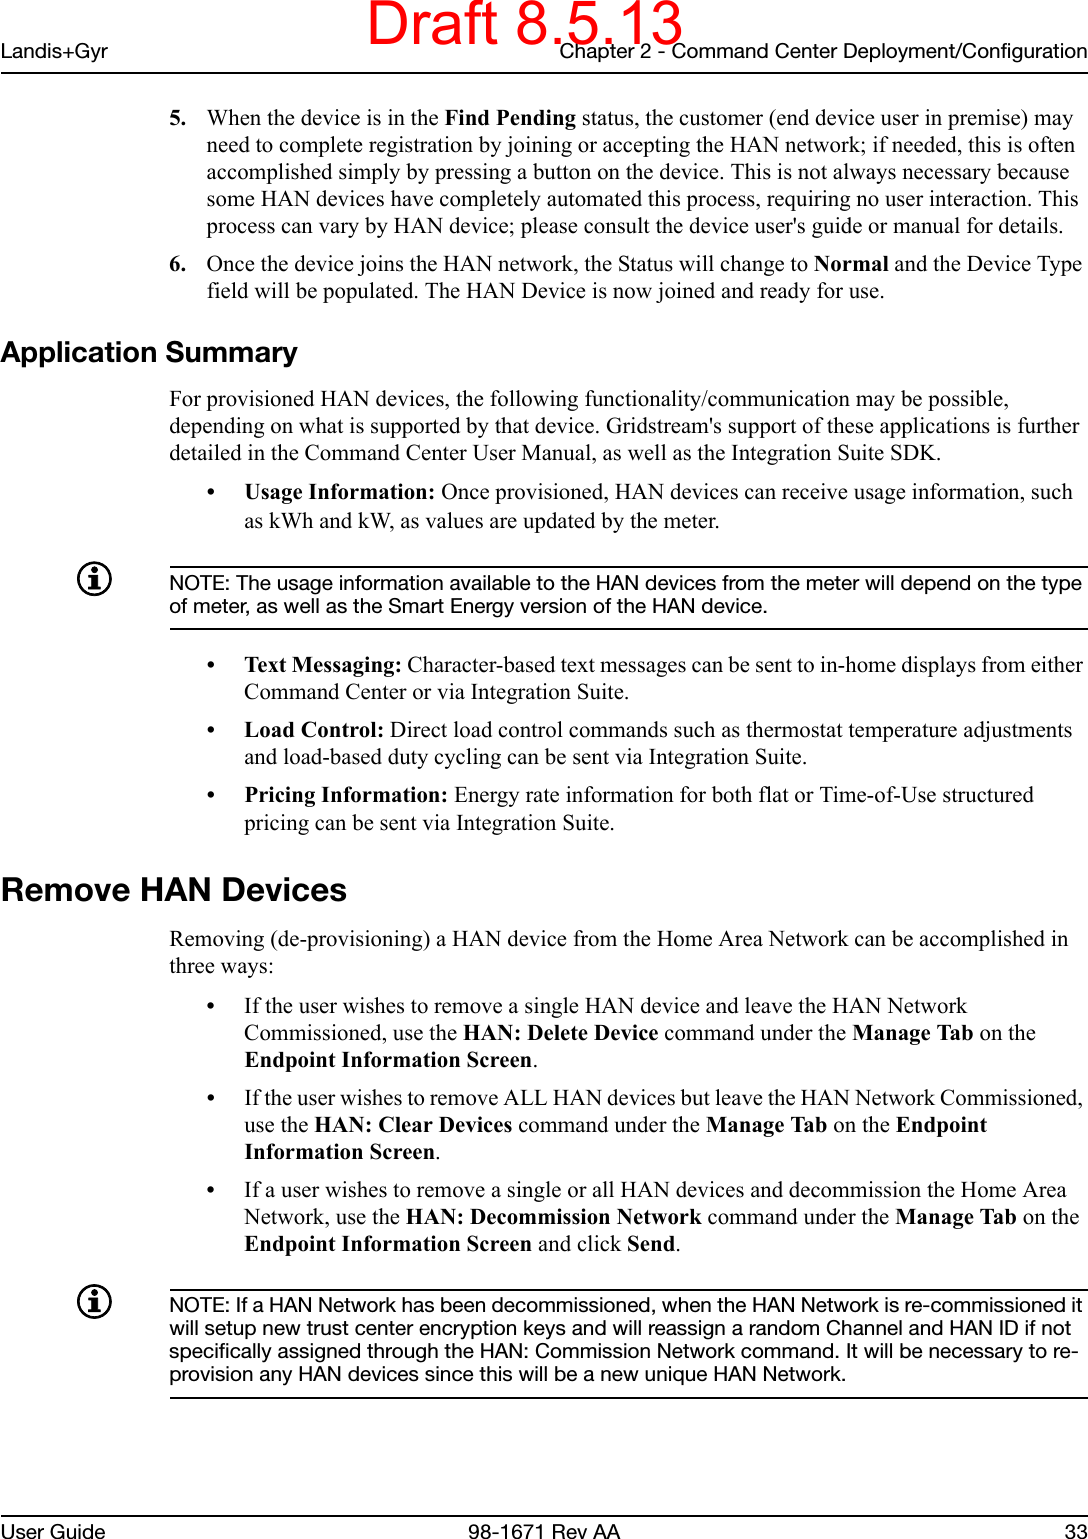 Landis+Gyr Chapter 2 - Command Center Deployment/ConfigurationUser Guide 98-1671 Rev AA 335. When the device is in the Find Pending status, the customer (end device user in premise) may need to complete registration by joining or accepting the HAN network; if needed, this is often accomplished simply by pressing a button on the device. This is not always necessary because some HAN devices have completely automated this process, requiring no user interaction. This process can vary by HAN device; please consult the device user&apos;s guide or manual for details.6. Once the device joins the HAN network, the Status will change to Normal and the Device Type field will be populated. The HAN Device is now joined and ready for use. Application SummaryFor provisioned HAN devices, the following functionality/communication may be possible, depending on what is supported by that device. Gridstream&apos;s support of these applications is further detailed in the Command Center User Manual, as well as the Integration Suite SDK. • Usage Information: Once provisioned, HAN devices can receive usage information, such as kWh and kW, as values are updated by the meter. NOTE: The usage information available to the HAN devices from the meter will depend on the type of meter, as well as the Smart Energy version of the HAN device. • Text Messaging: Character-based text messages can be sent to in-home displays from either Command Center or via Integration Suite. • Load Control: Direct load control commands such as thermostat temperature adjustments and load-based duty cycling can be sent via Integration Suite. • Pricing Information: Energy rate information for both flat or Time-of-Use structured pricing can be sent via Integration Suite. Remove HAN DevicesRemoving (de-provisioning) a HAN device from the Home Area Network can be accomplished in three ways: •If the user wishes to remove a single HAN device and leave the HAN Network Commissioned, use the HAN: Delete Device command under the Manage Tab on the Endpoint Information Screen. •If the user wishes to remove ALL HAN devices but leave the HAN Network Commissioned, use the HAN: Clear Devices command under the Manage Tab on the Endpoint Information Screen.•If a user wishes to remove a single or all HAN devices and decommission the Home Area Network, use the HAN: Decommission Network command under the Manage Tab on the Endpoint Information Screen and click Send. NOTE: If a HAN Network has been decommissioned, when the HAN Network is re-commissioned it will setup new trust center encryption keys and will reassign a random Channel and HAN ID if not specifically assigned through the HAN: Commission Network command. It will be necessary to re-provision any HAN devices since this will be a new unique HAN Network. Draft 8.5.13